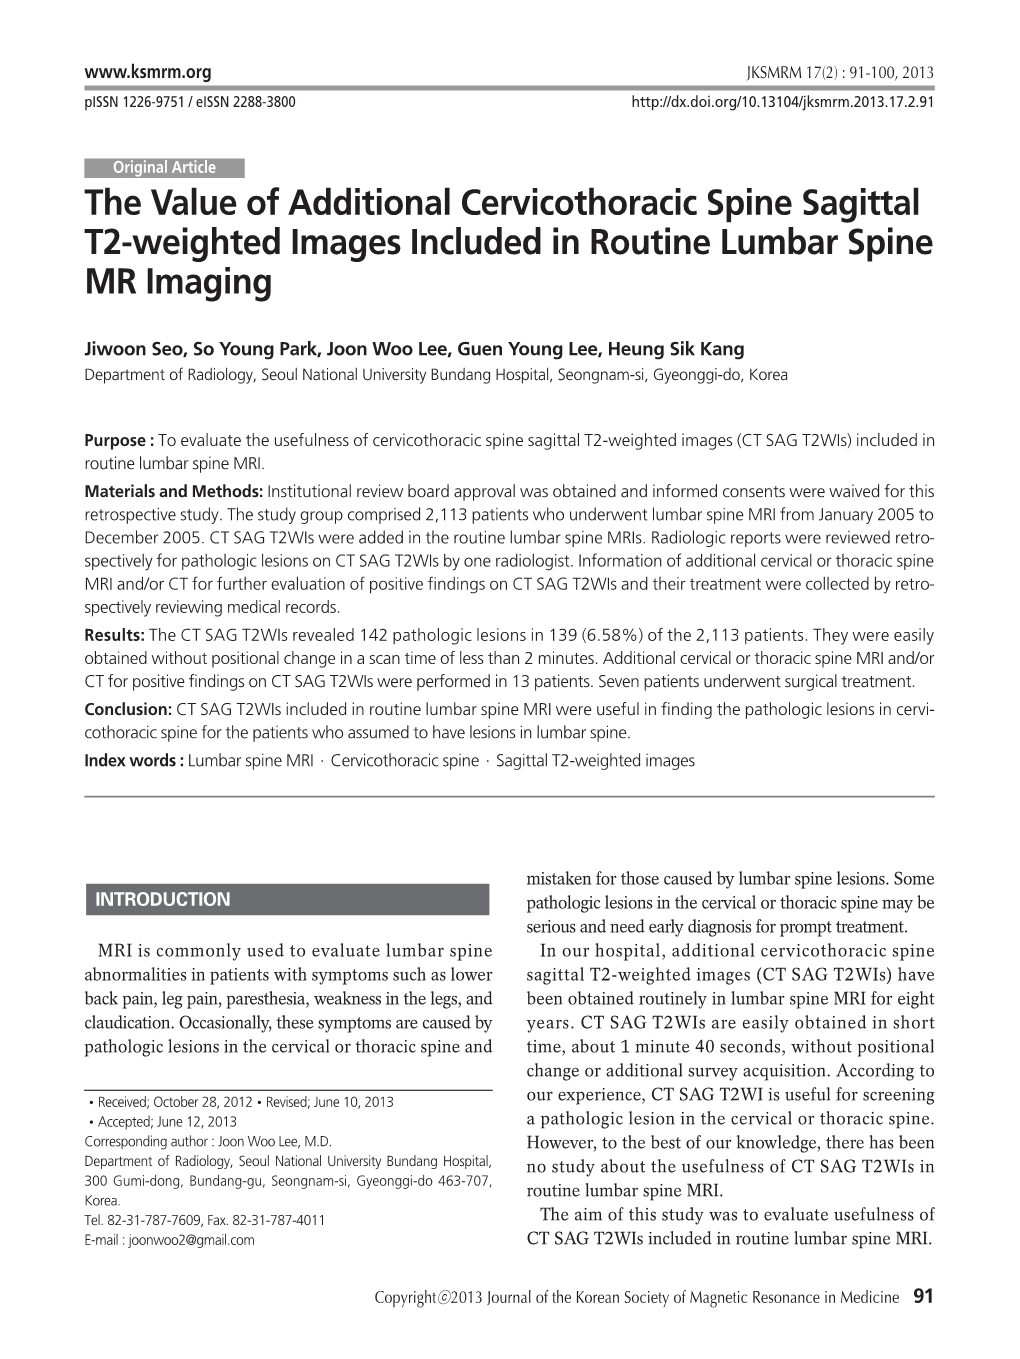 The Value of Additional Cervicothoracic Spine Sagittal T2-Weighted Images Included in Routine Lumbar Spine MR Imaging